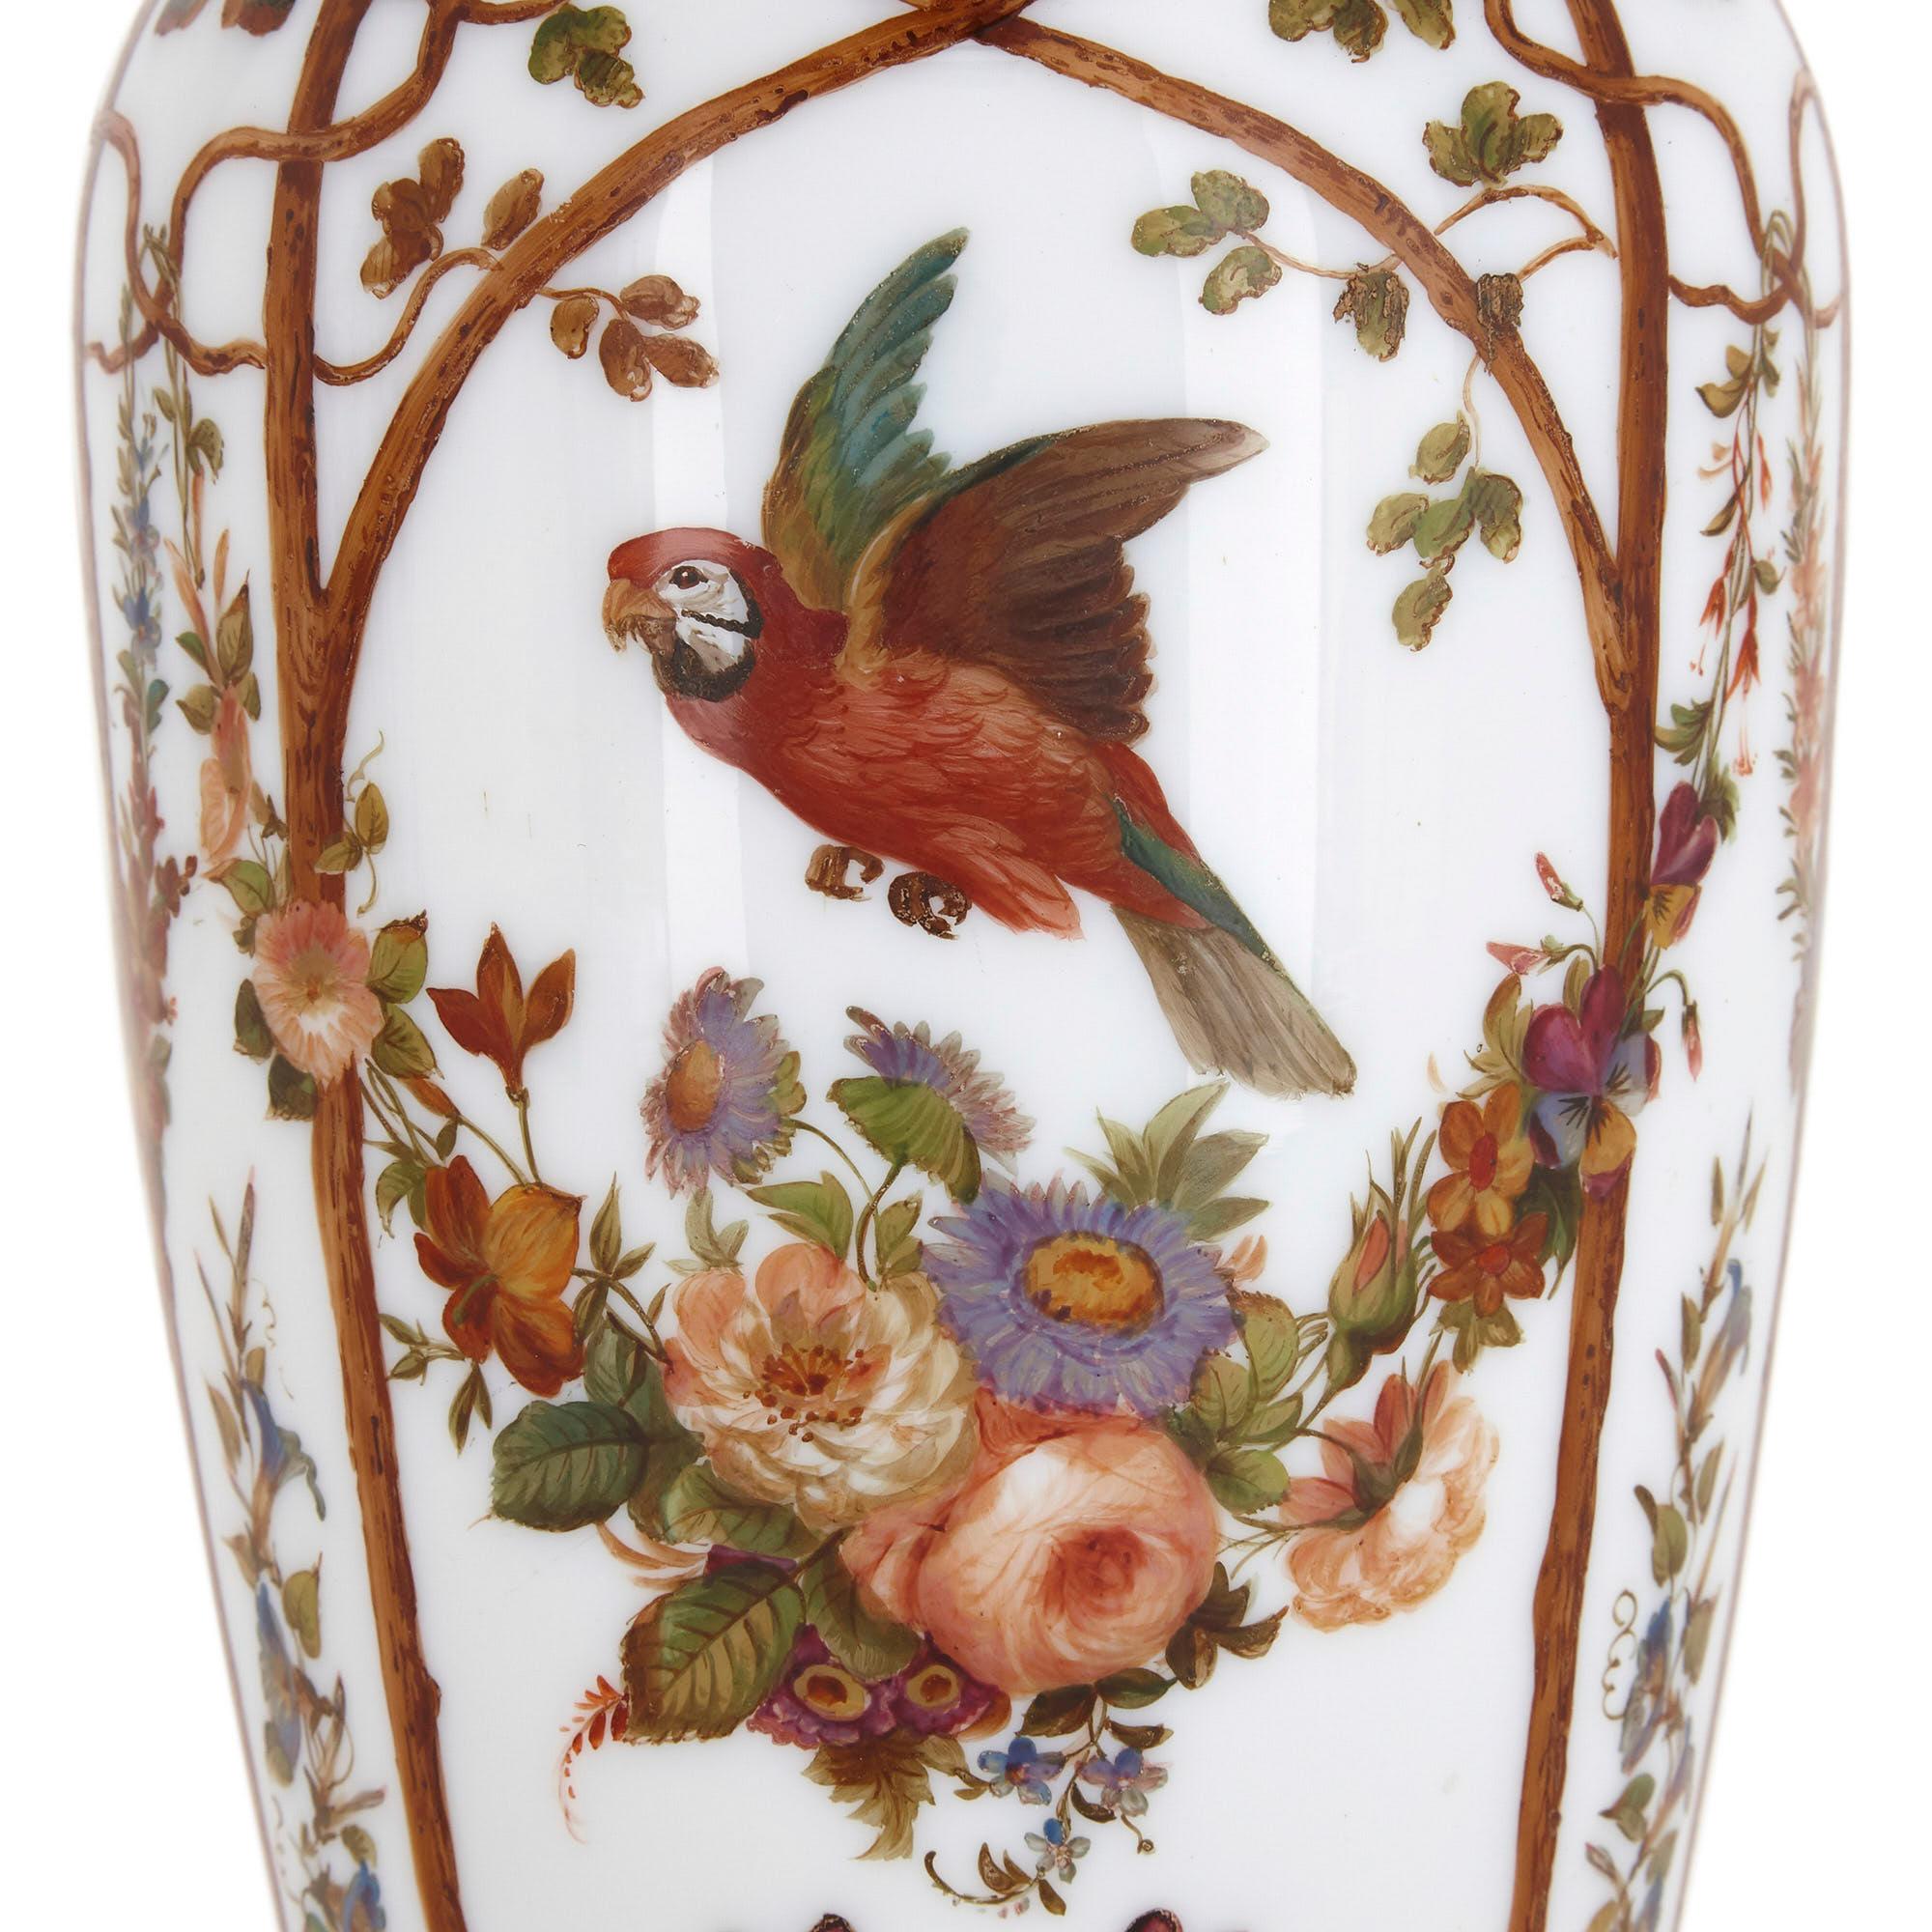 19th Century Pair of Opaline Glass Vases Painted with Birds and Flowers